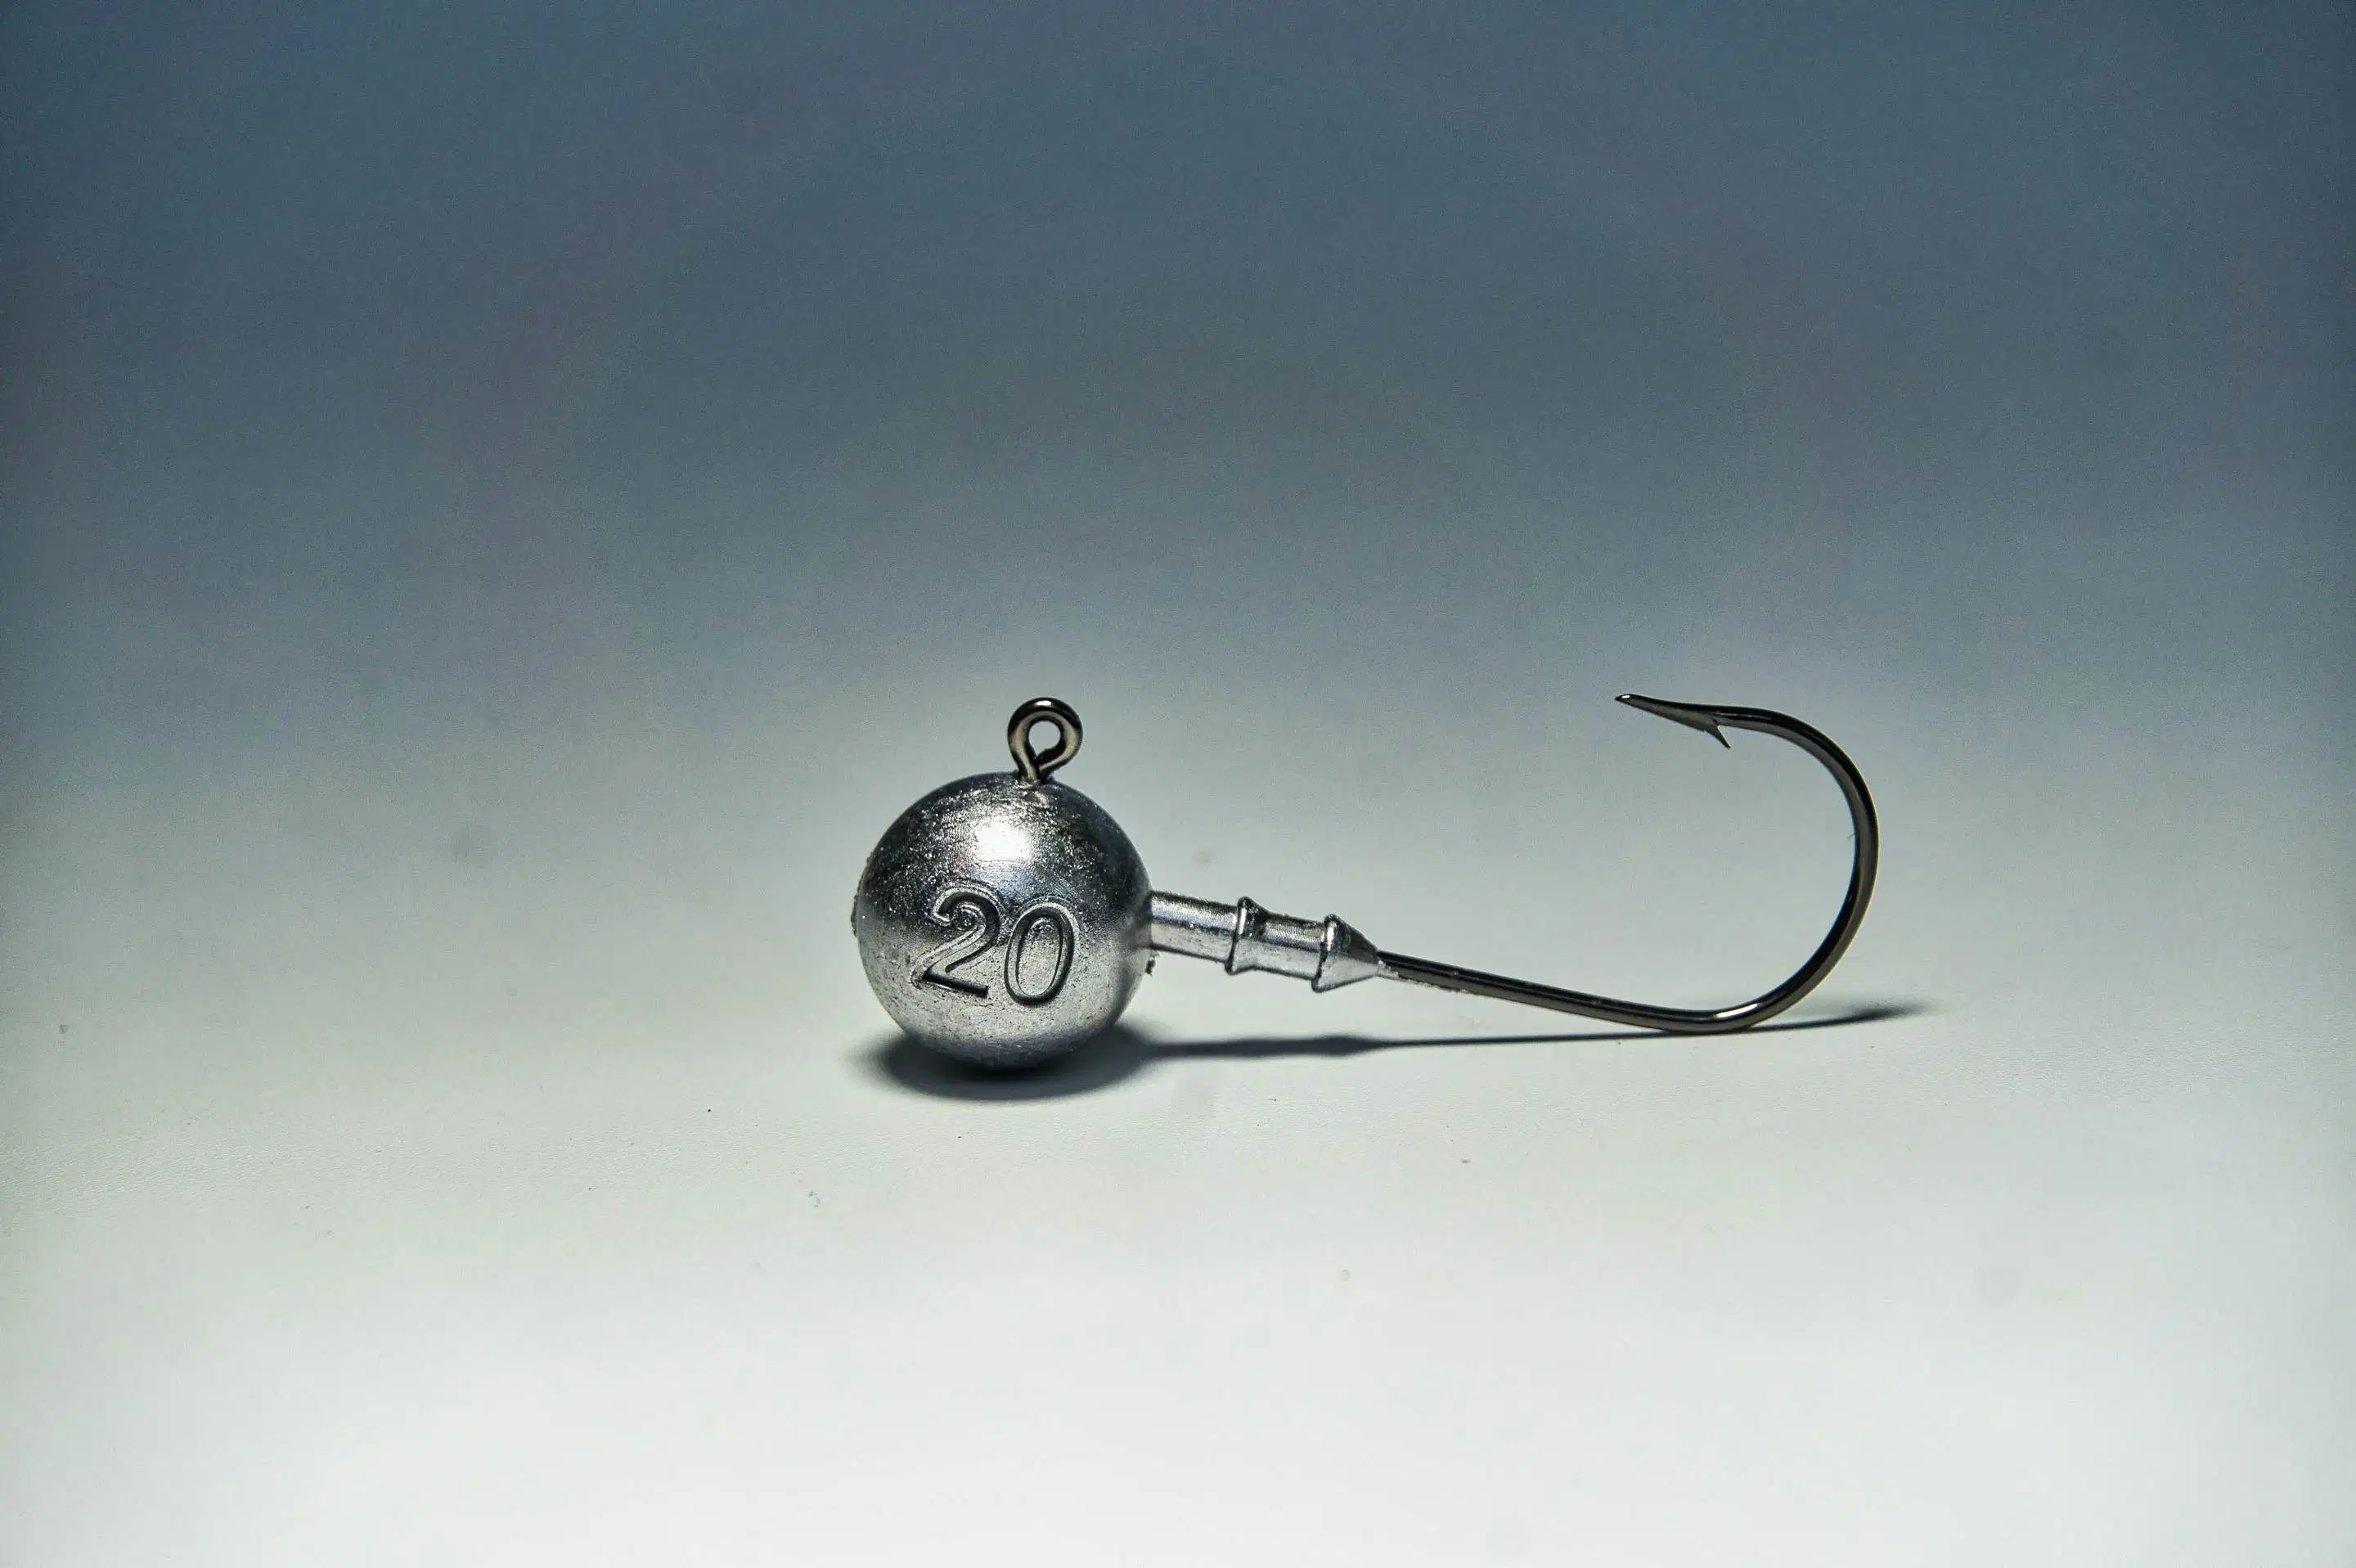 The Best Selling Round Jighead with Good Quality Hook